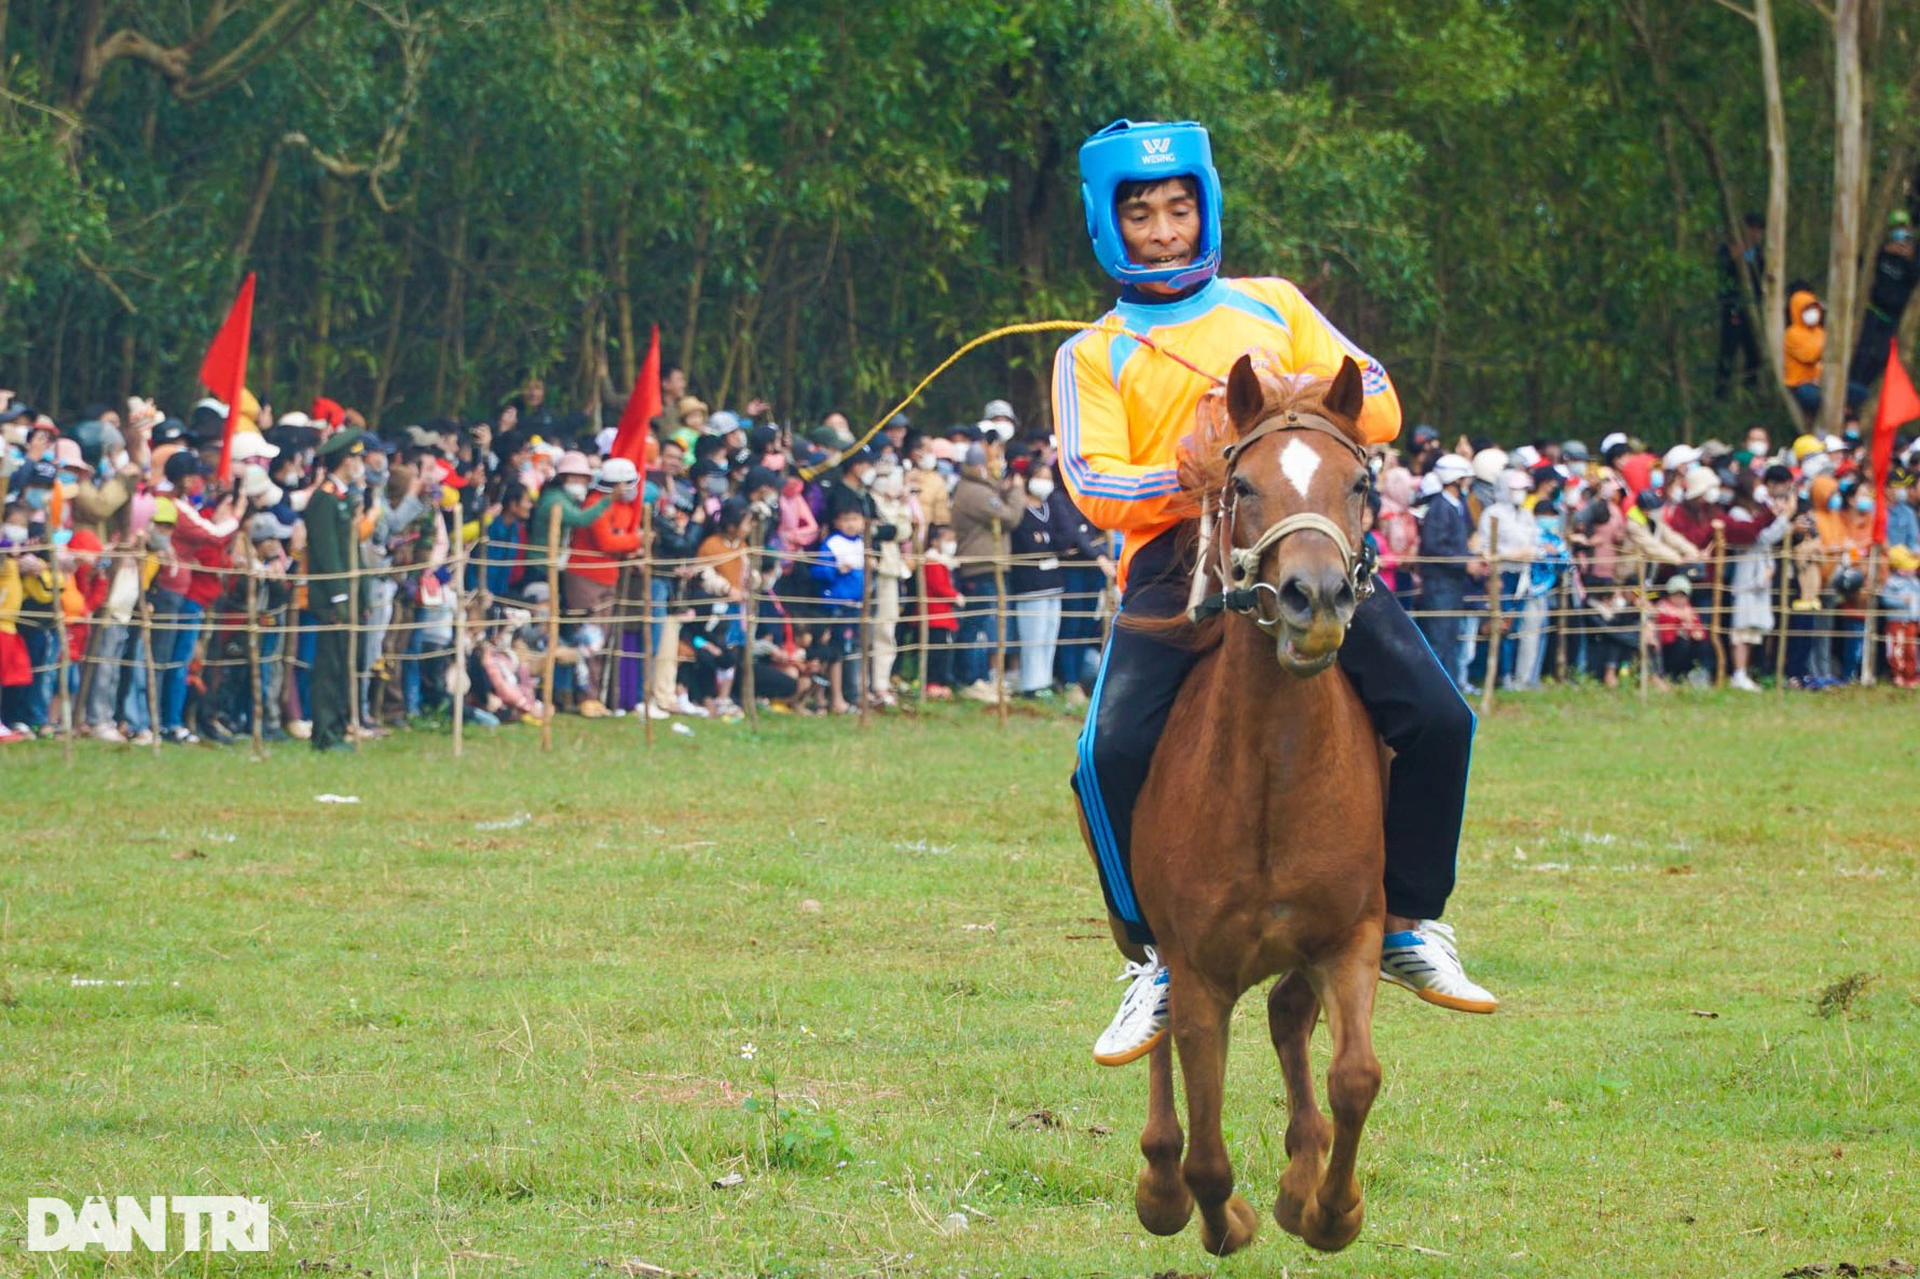 Thousands of people enjoy watching farmers race horses in Go Thi Thung festival - 9